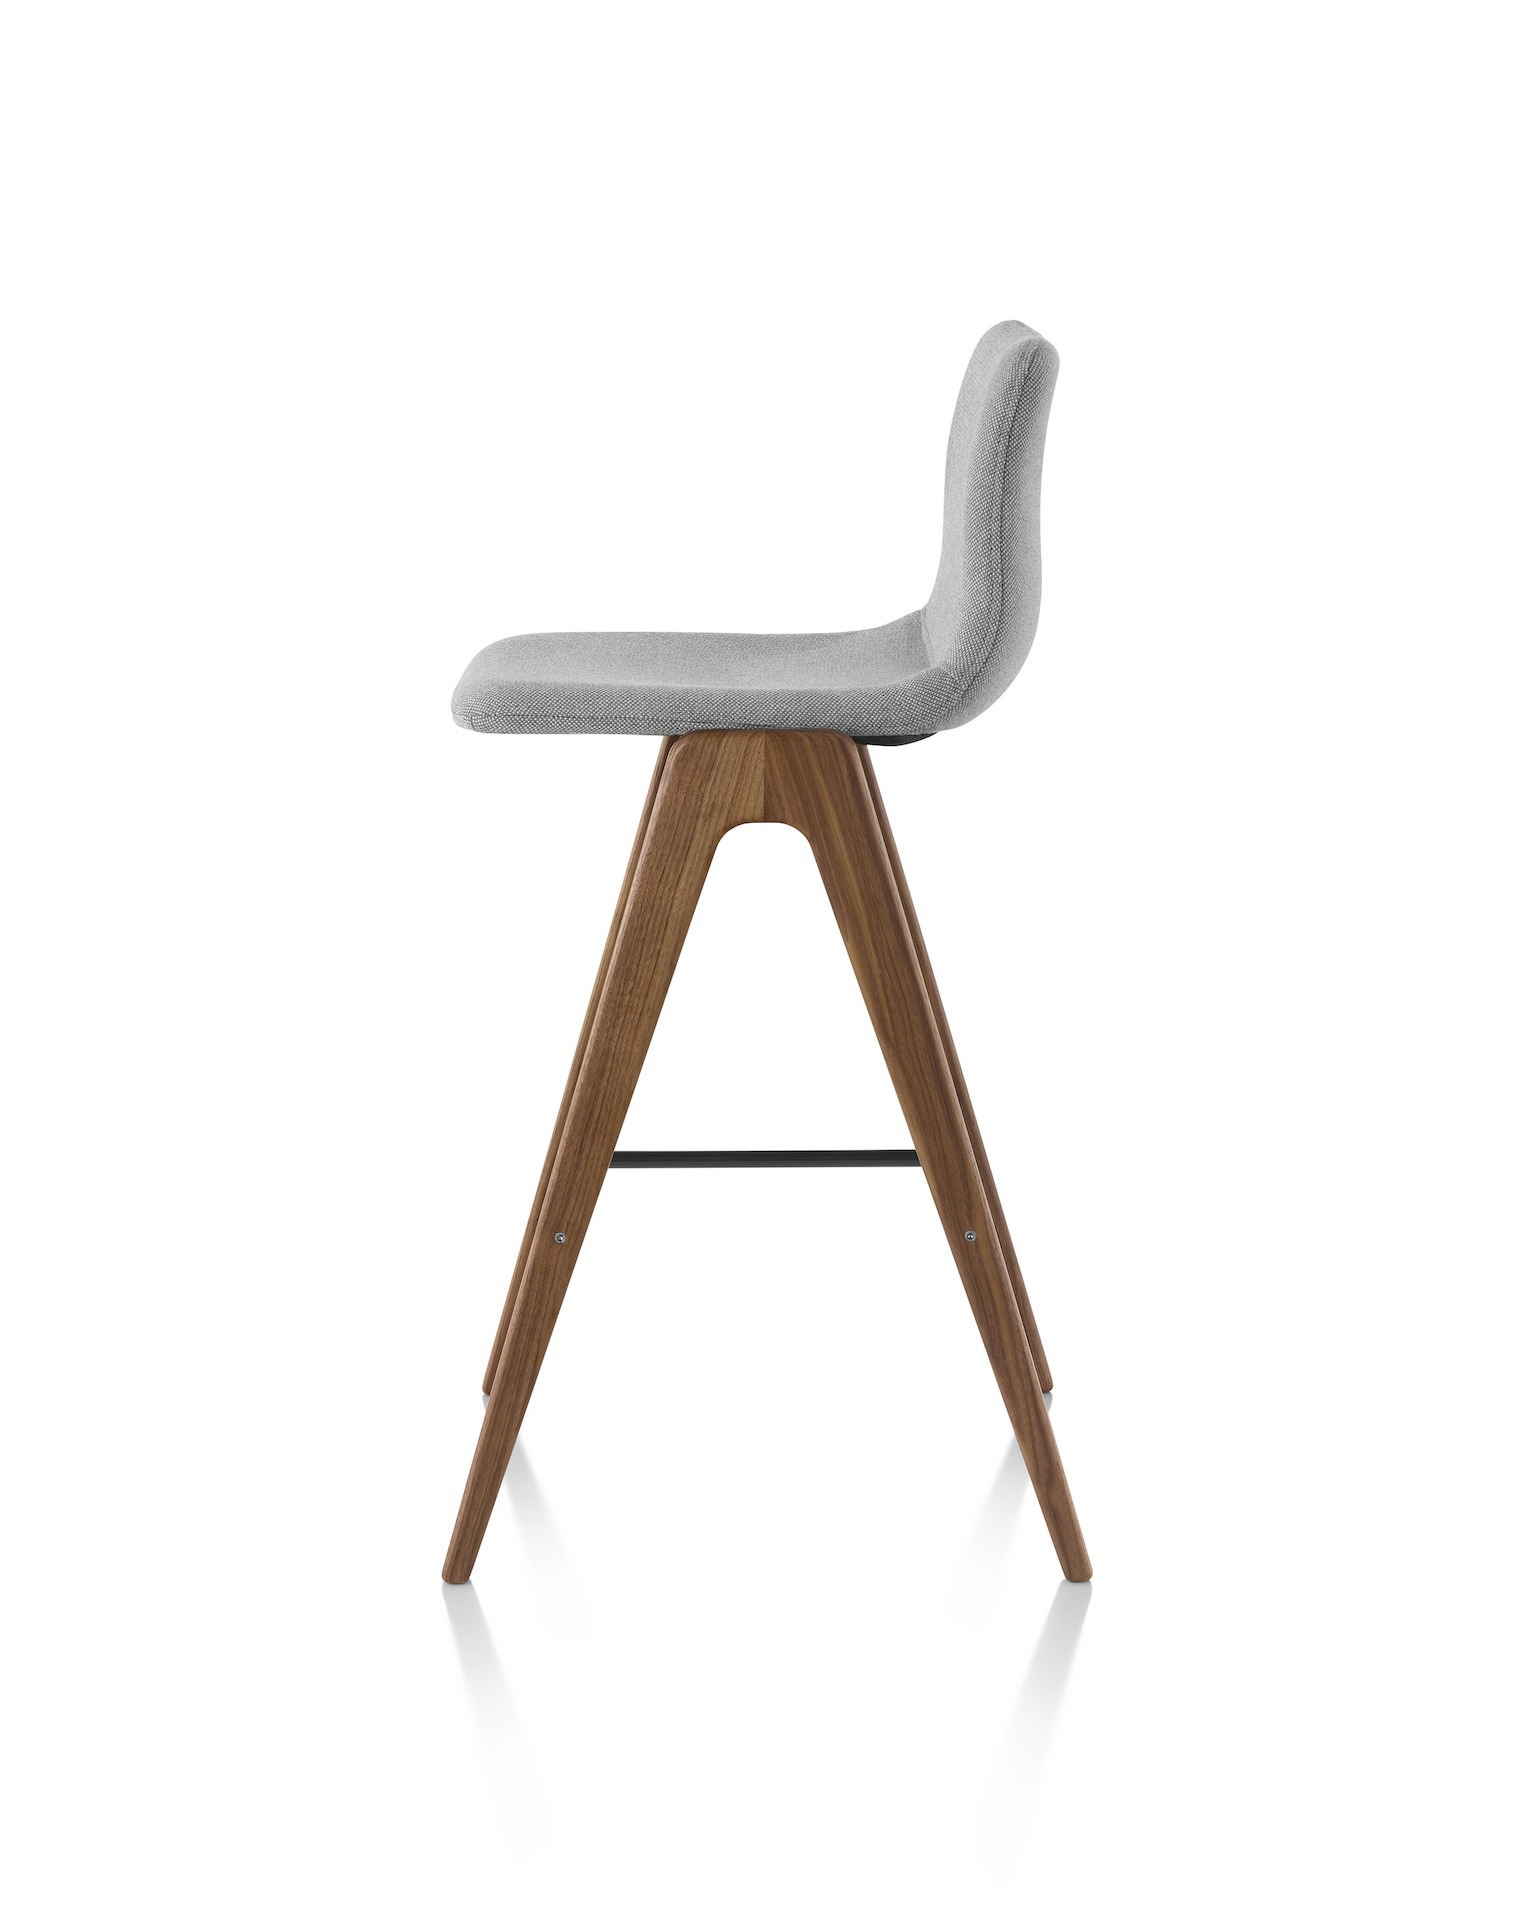 Bar-height Viv Wood Stool with a walnut base and grey textile.